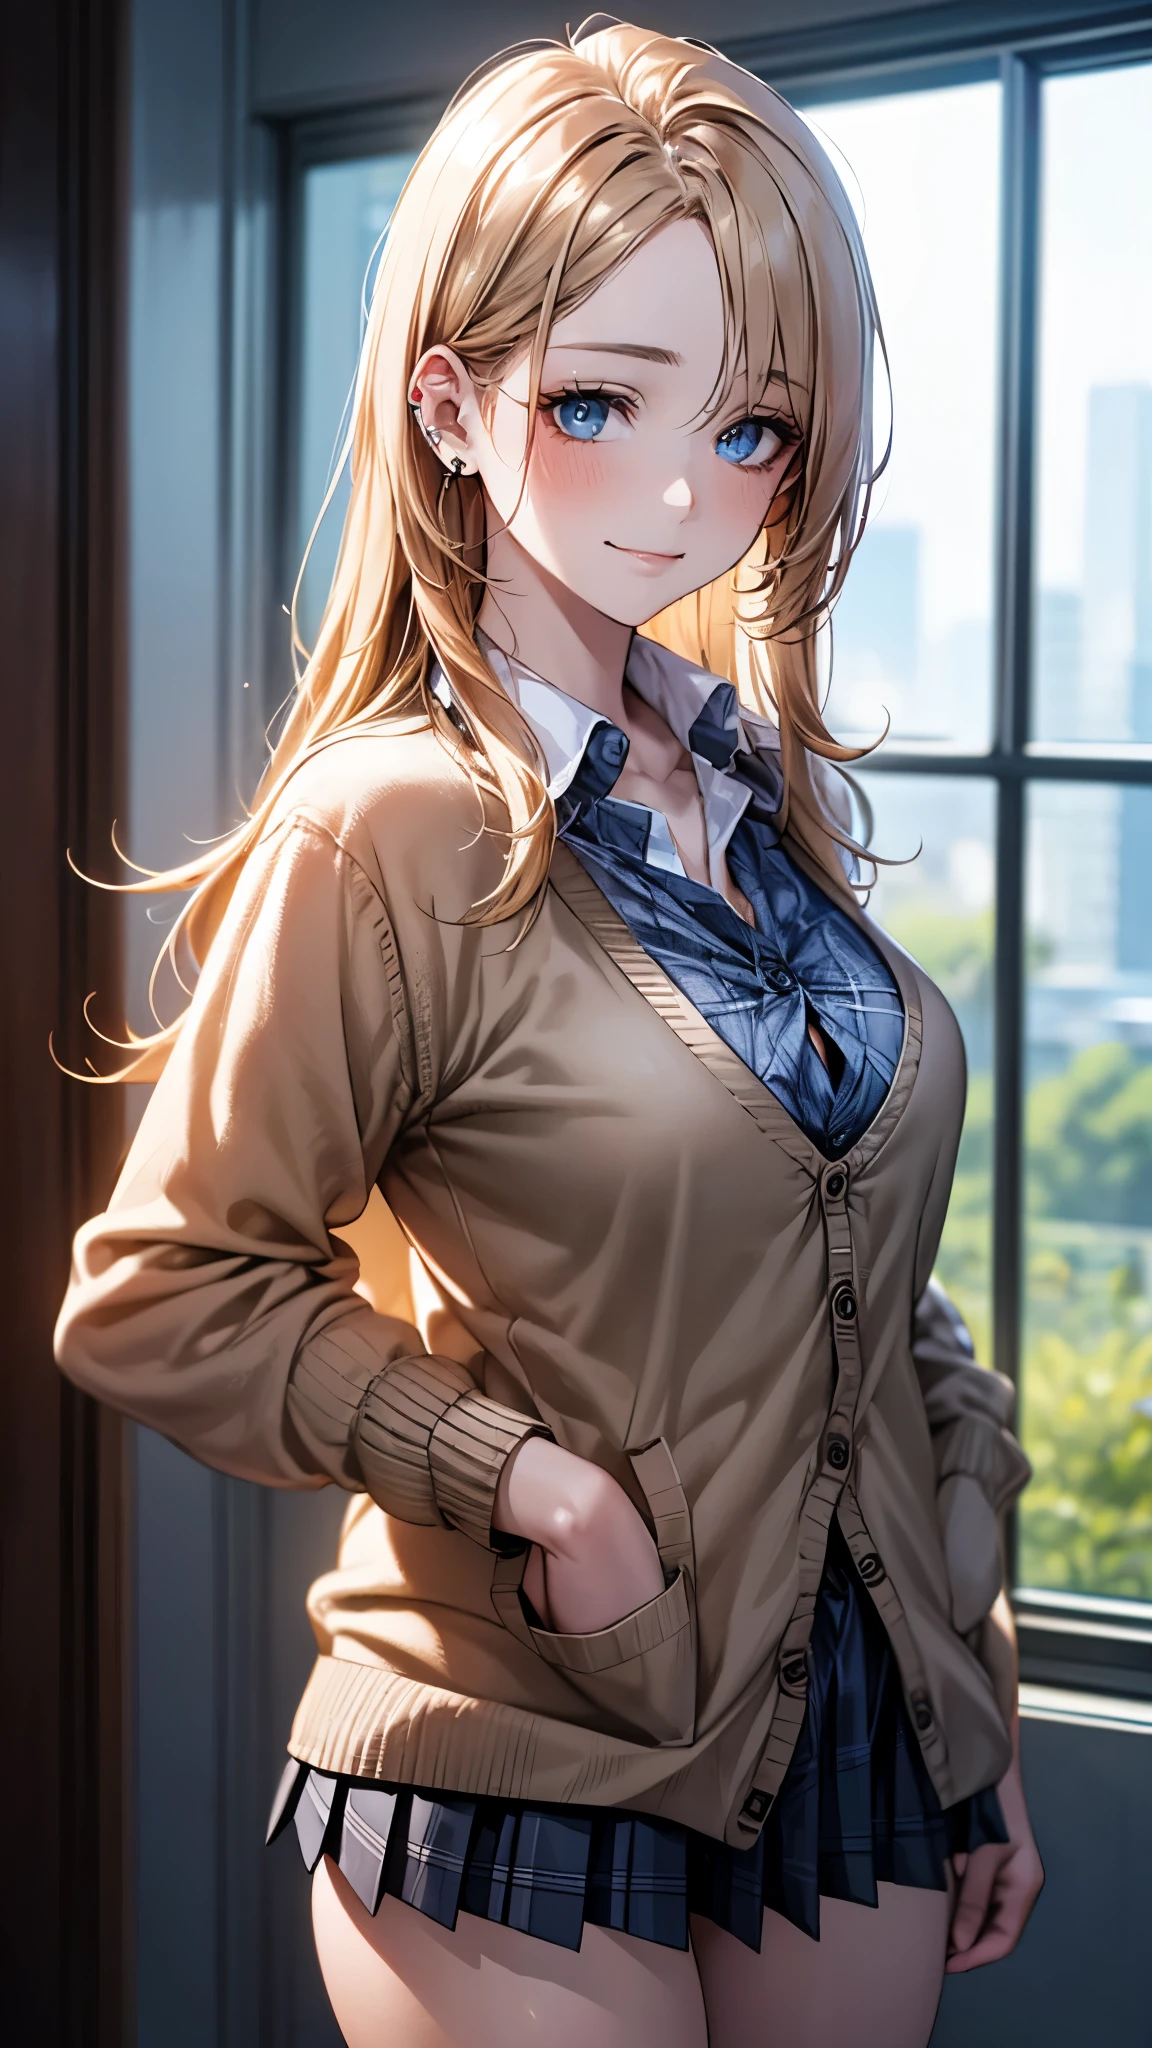 (masterpiece:1.2, top-quality), (realistic, photorealistic:1.4), beautiful illustration, (natural side lighting, movie lighting), 
looking at viewer, 1 girl, japanese, high school girl, perfect face, cute and symmetrical face, shiny skin, babyface, 
(long hair, straight hair, sideburns, (blond hair)), swept bangs, blue eyeiddle breasts, seductive thighs, big ass), piercings, 
beautiful hair, beautiful face, beautiful detailed eyes, beautiful clavicle, beautiful body, beautiful chest, beautiful thigh, beautiful legs, beautiful fingers, 
(((brown cardigan, close clothes), white collared shirt, black plaid pleated miniskirt)), 
(beautiful scenery), evening, (caffee shop), standing, (lovly smile, upper eyes), 